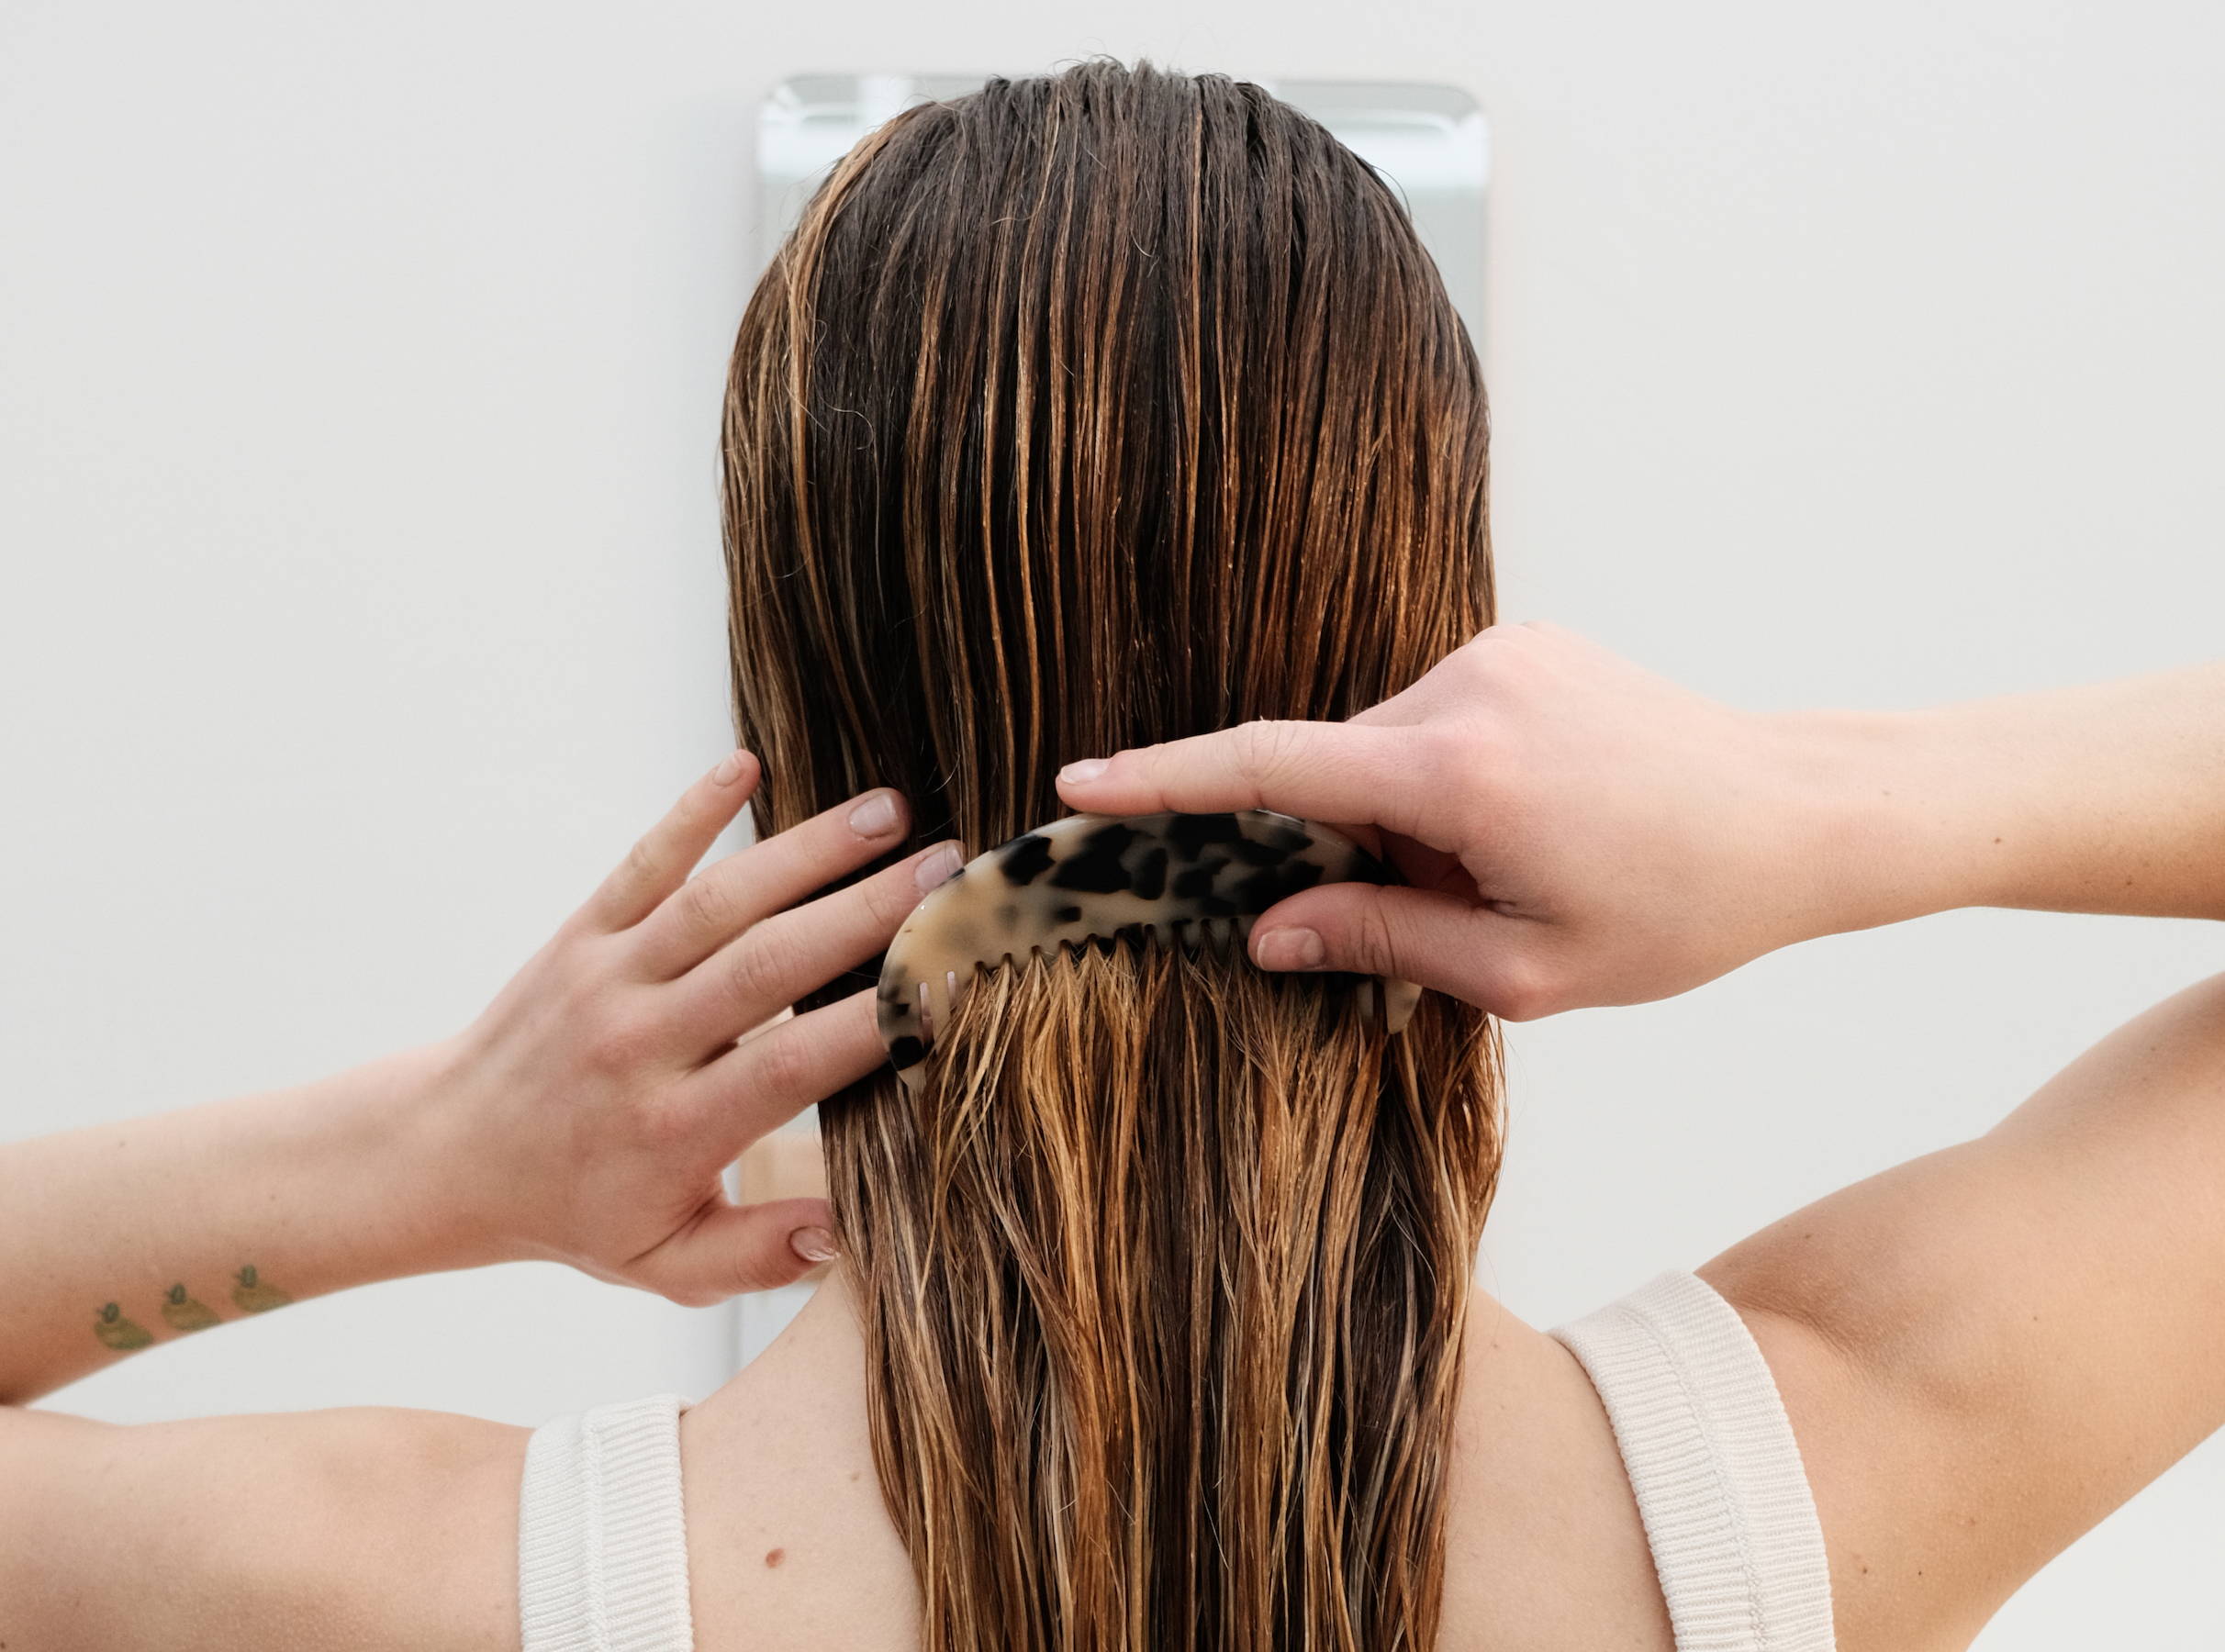 Accessories for wet hair styling